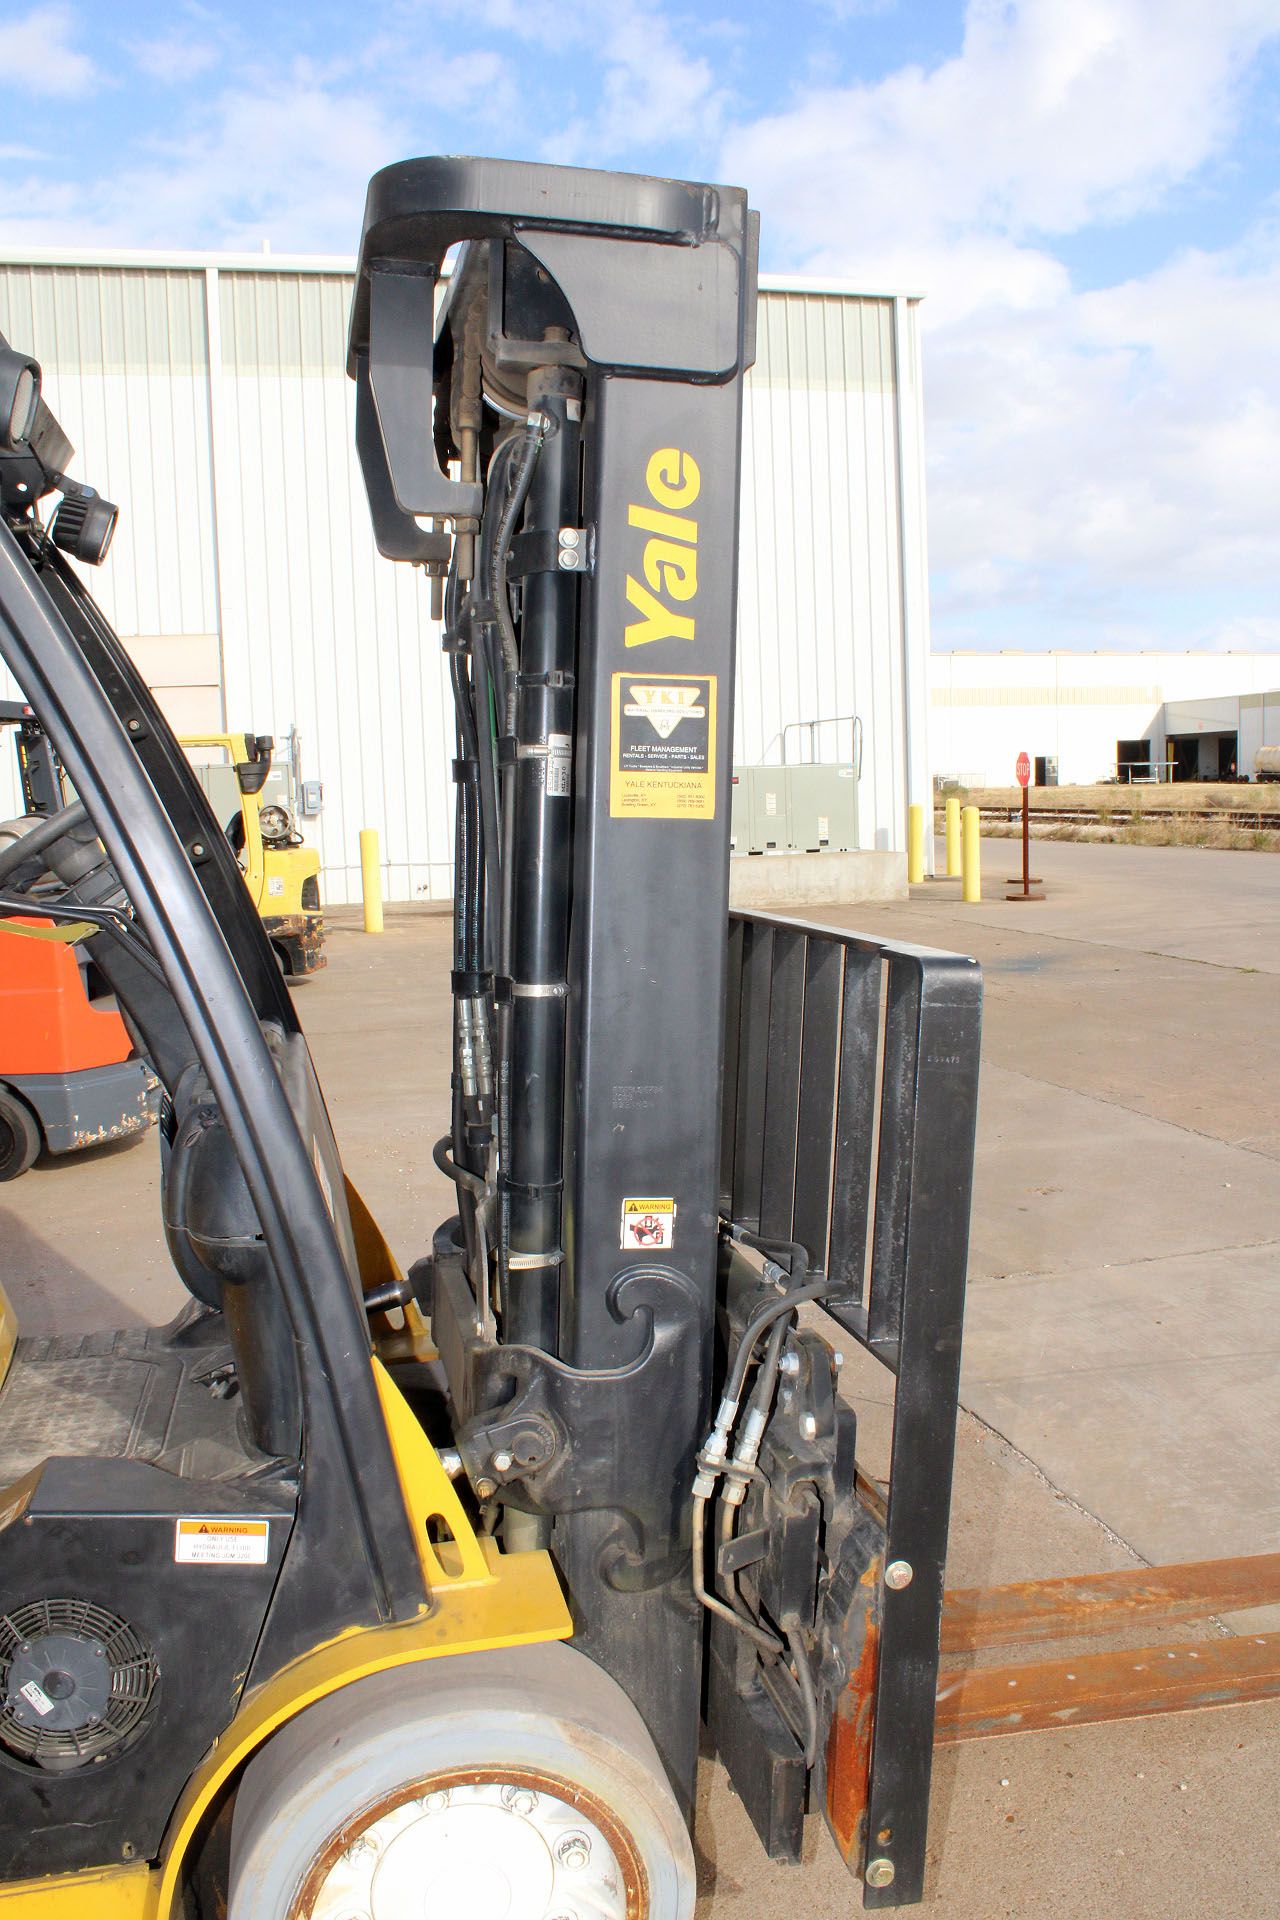 FORKLIFT, YALE 8,000 LB. BASE CAP. MDL. GLC080, new 2016, LPG, 200" max. lift ht., 94" 3-stage mast, - Image 11 of 11